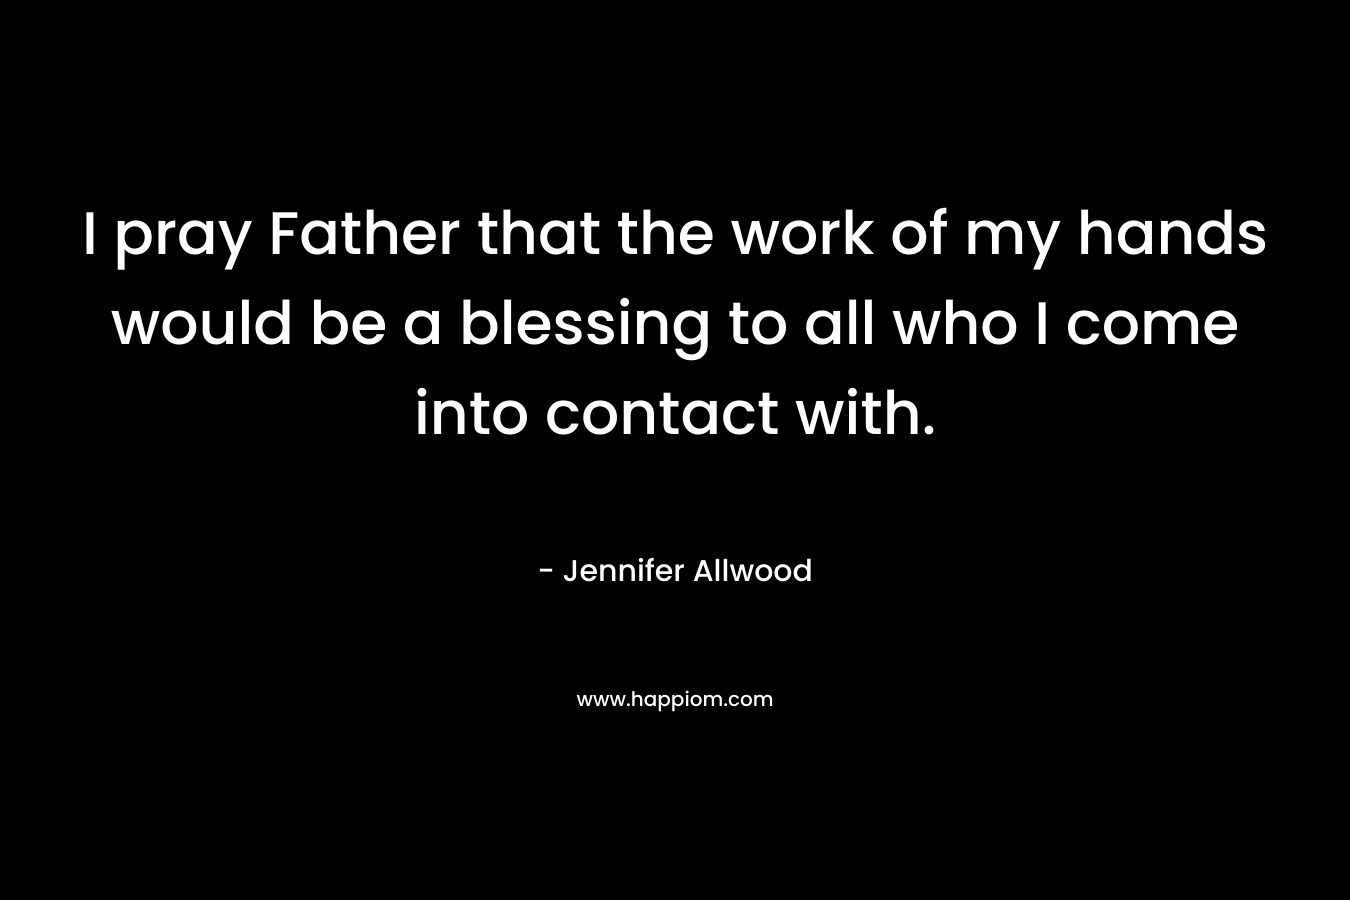 I pray Father that the work of my hands would be a blessing to all who I come into contact with.